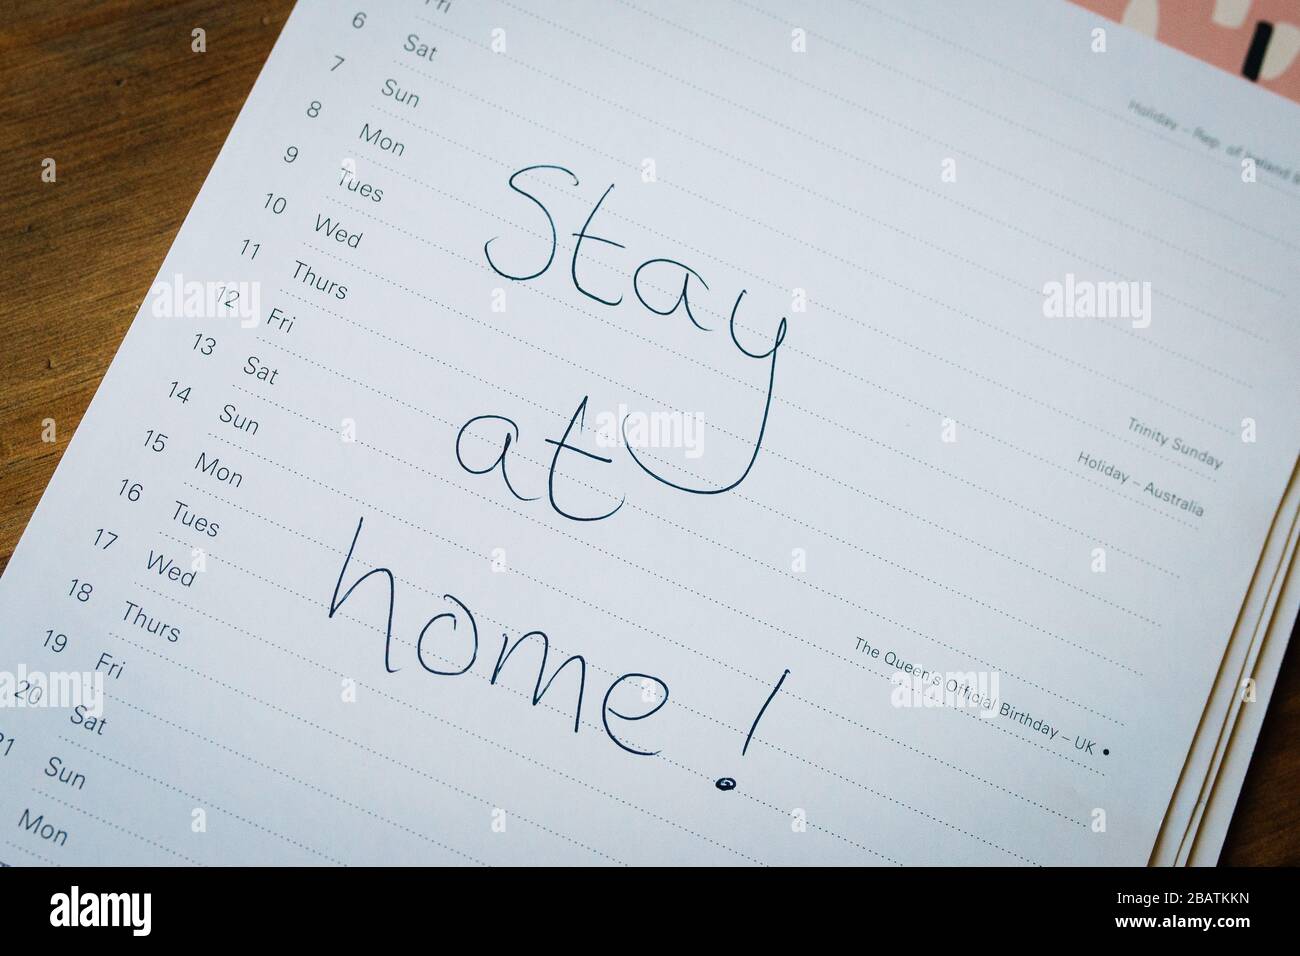 Coronavirus covid19 lockdown quarantine. Stay at home. Calendar showing a blank month with the words 'stay at home' written Stock Photo